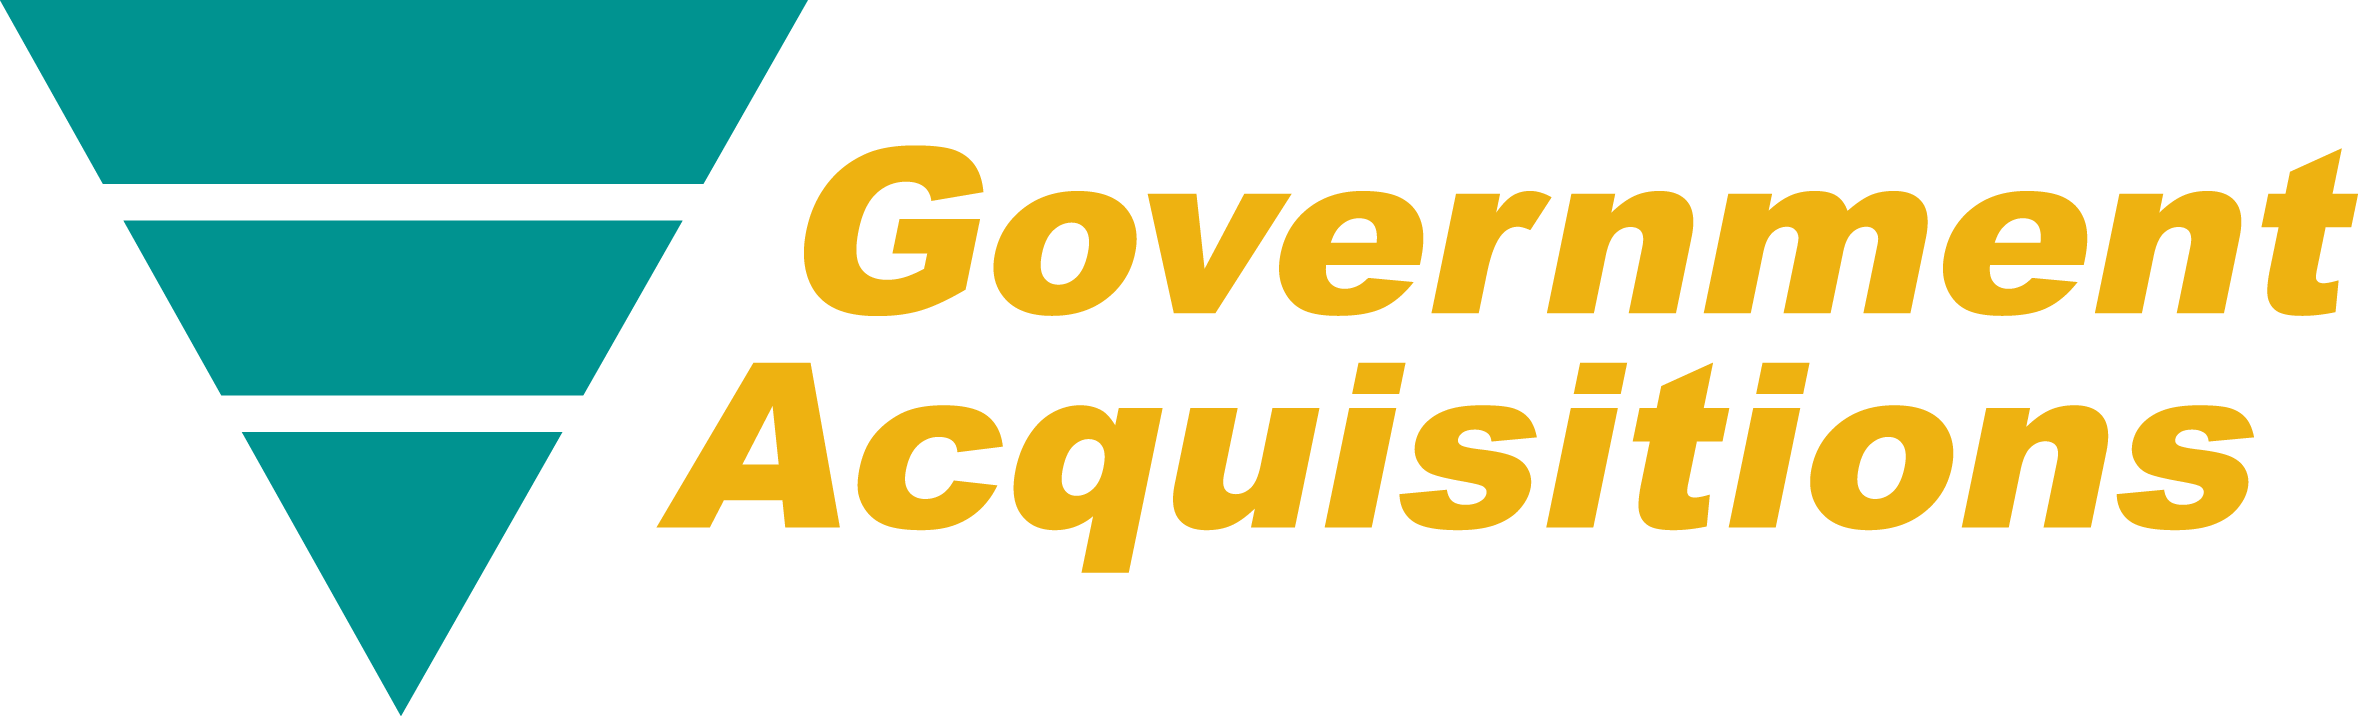 government-acquisitions